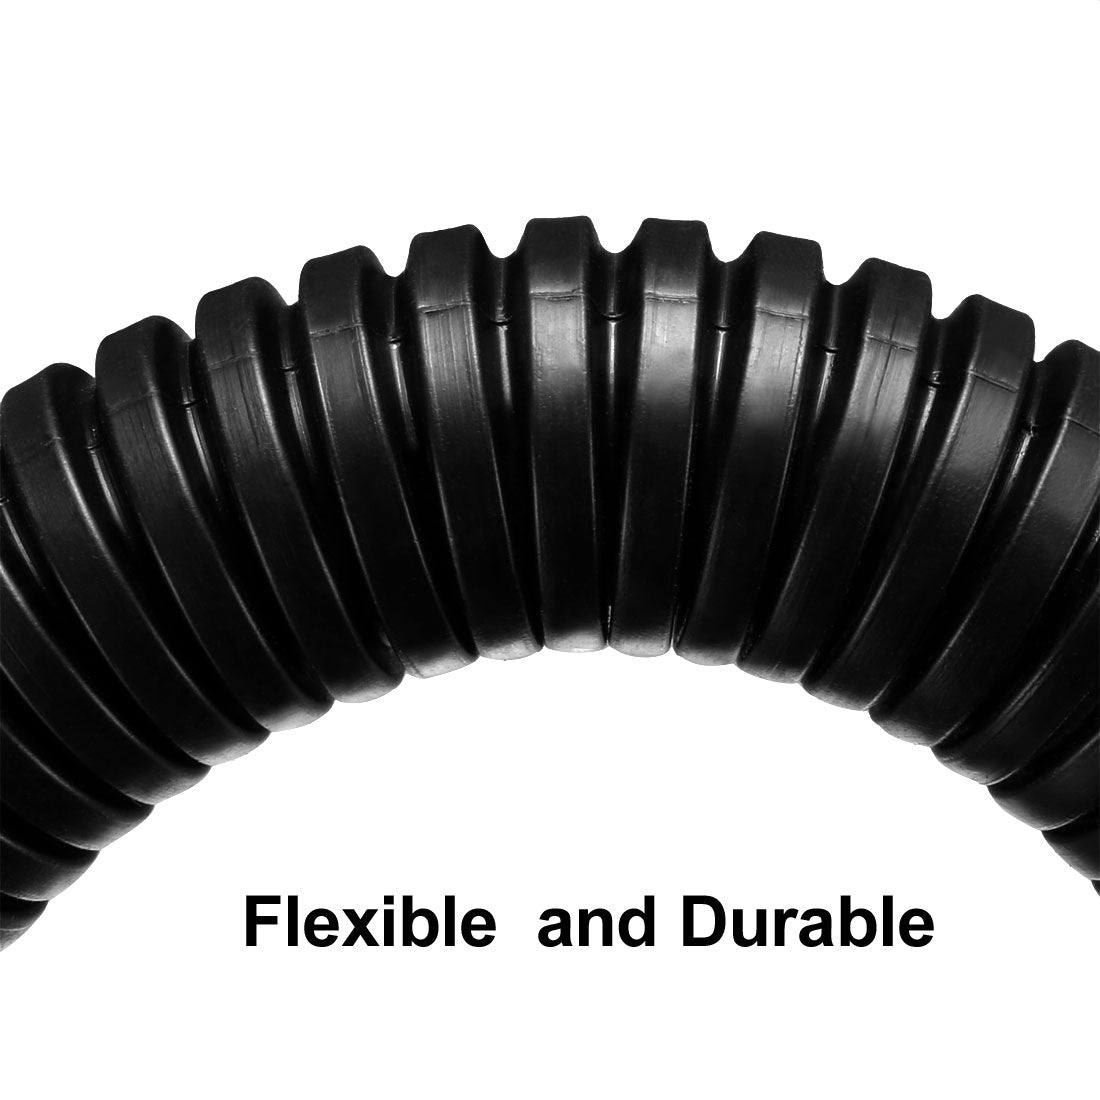 uxcell Uxcell 1 M 20 x 25 mm PP Flexible Corrugated Conduit Tube for Garden,Office Black